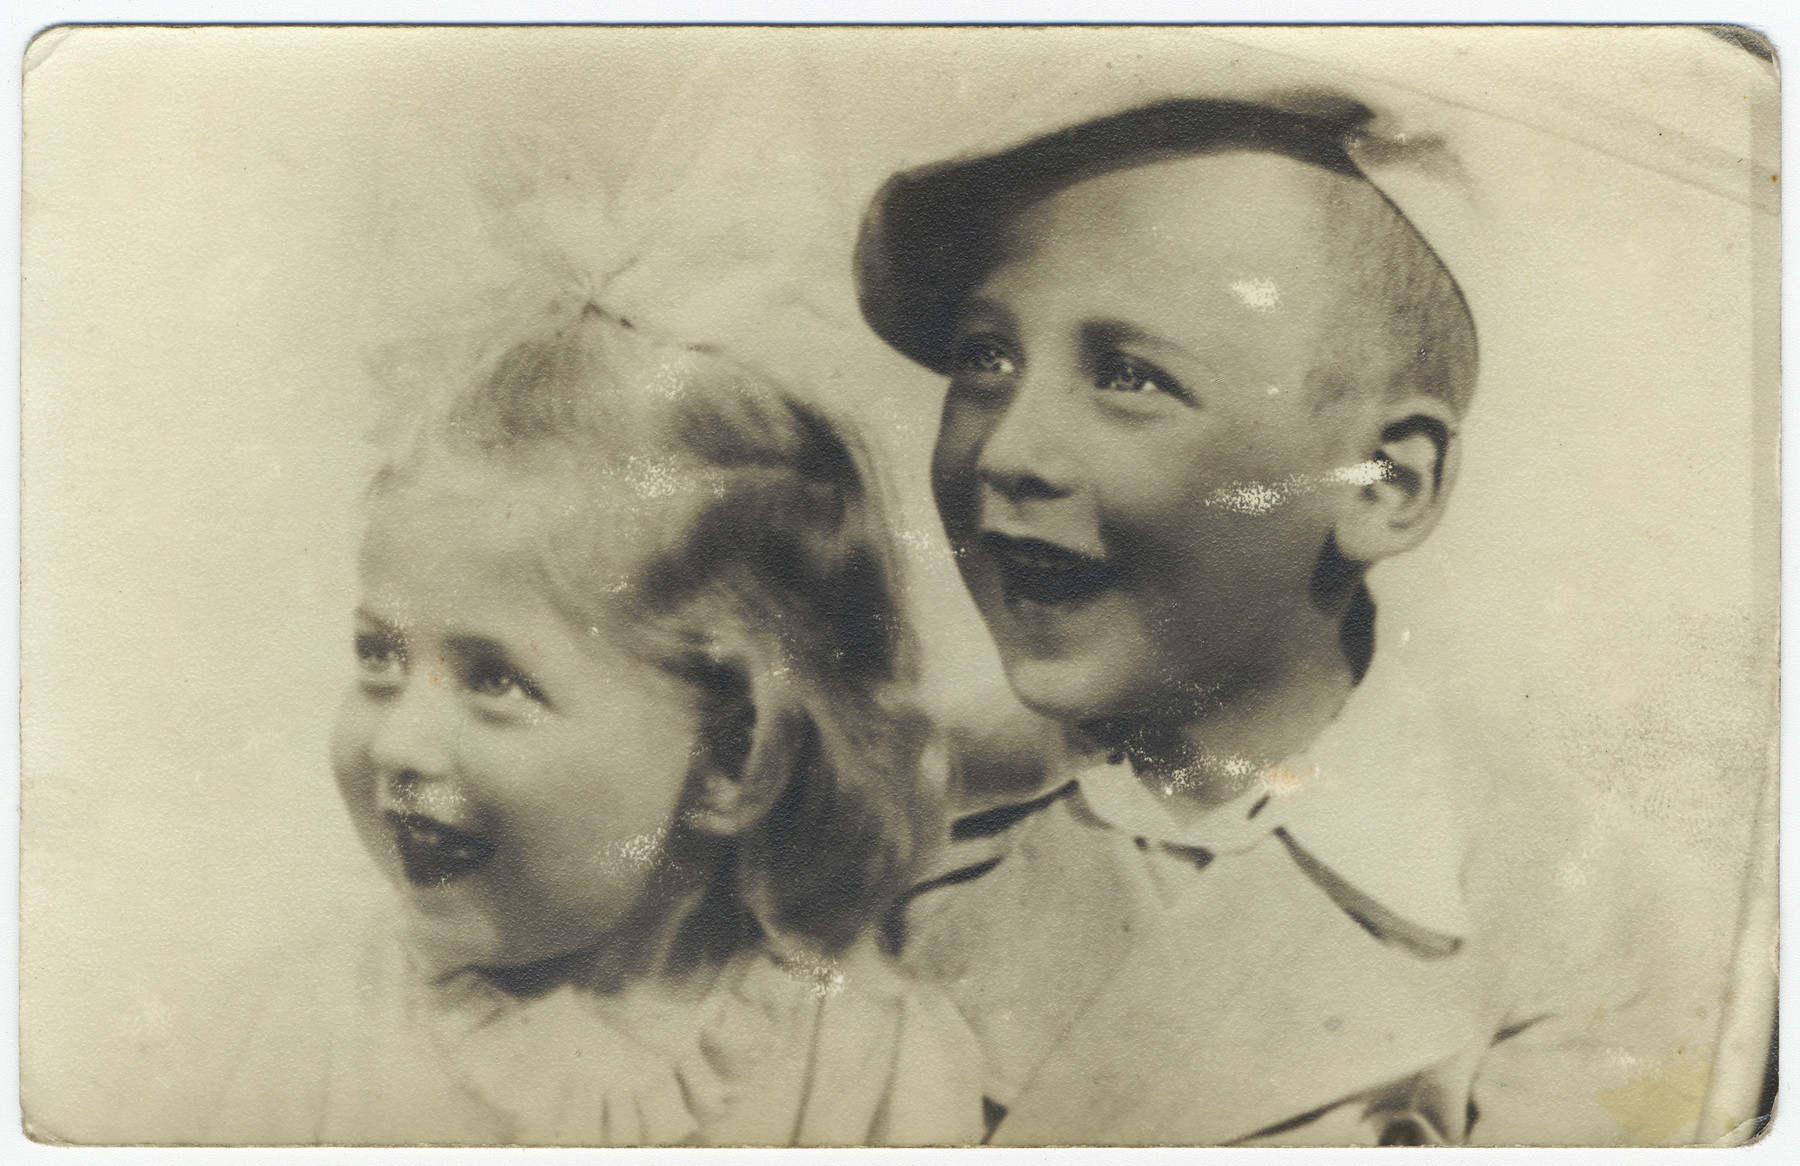 Portrait of two Jewish children who perished in the Holocaust.

Pictured are Gyorgy Freedman (b. 7/12/36) and his younger sister.  They are the children of the donor's stepfather.